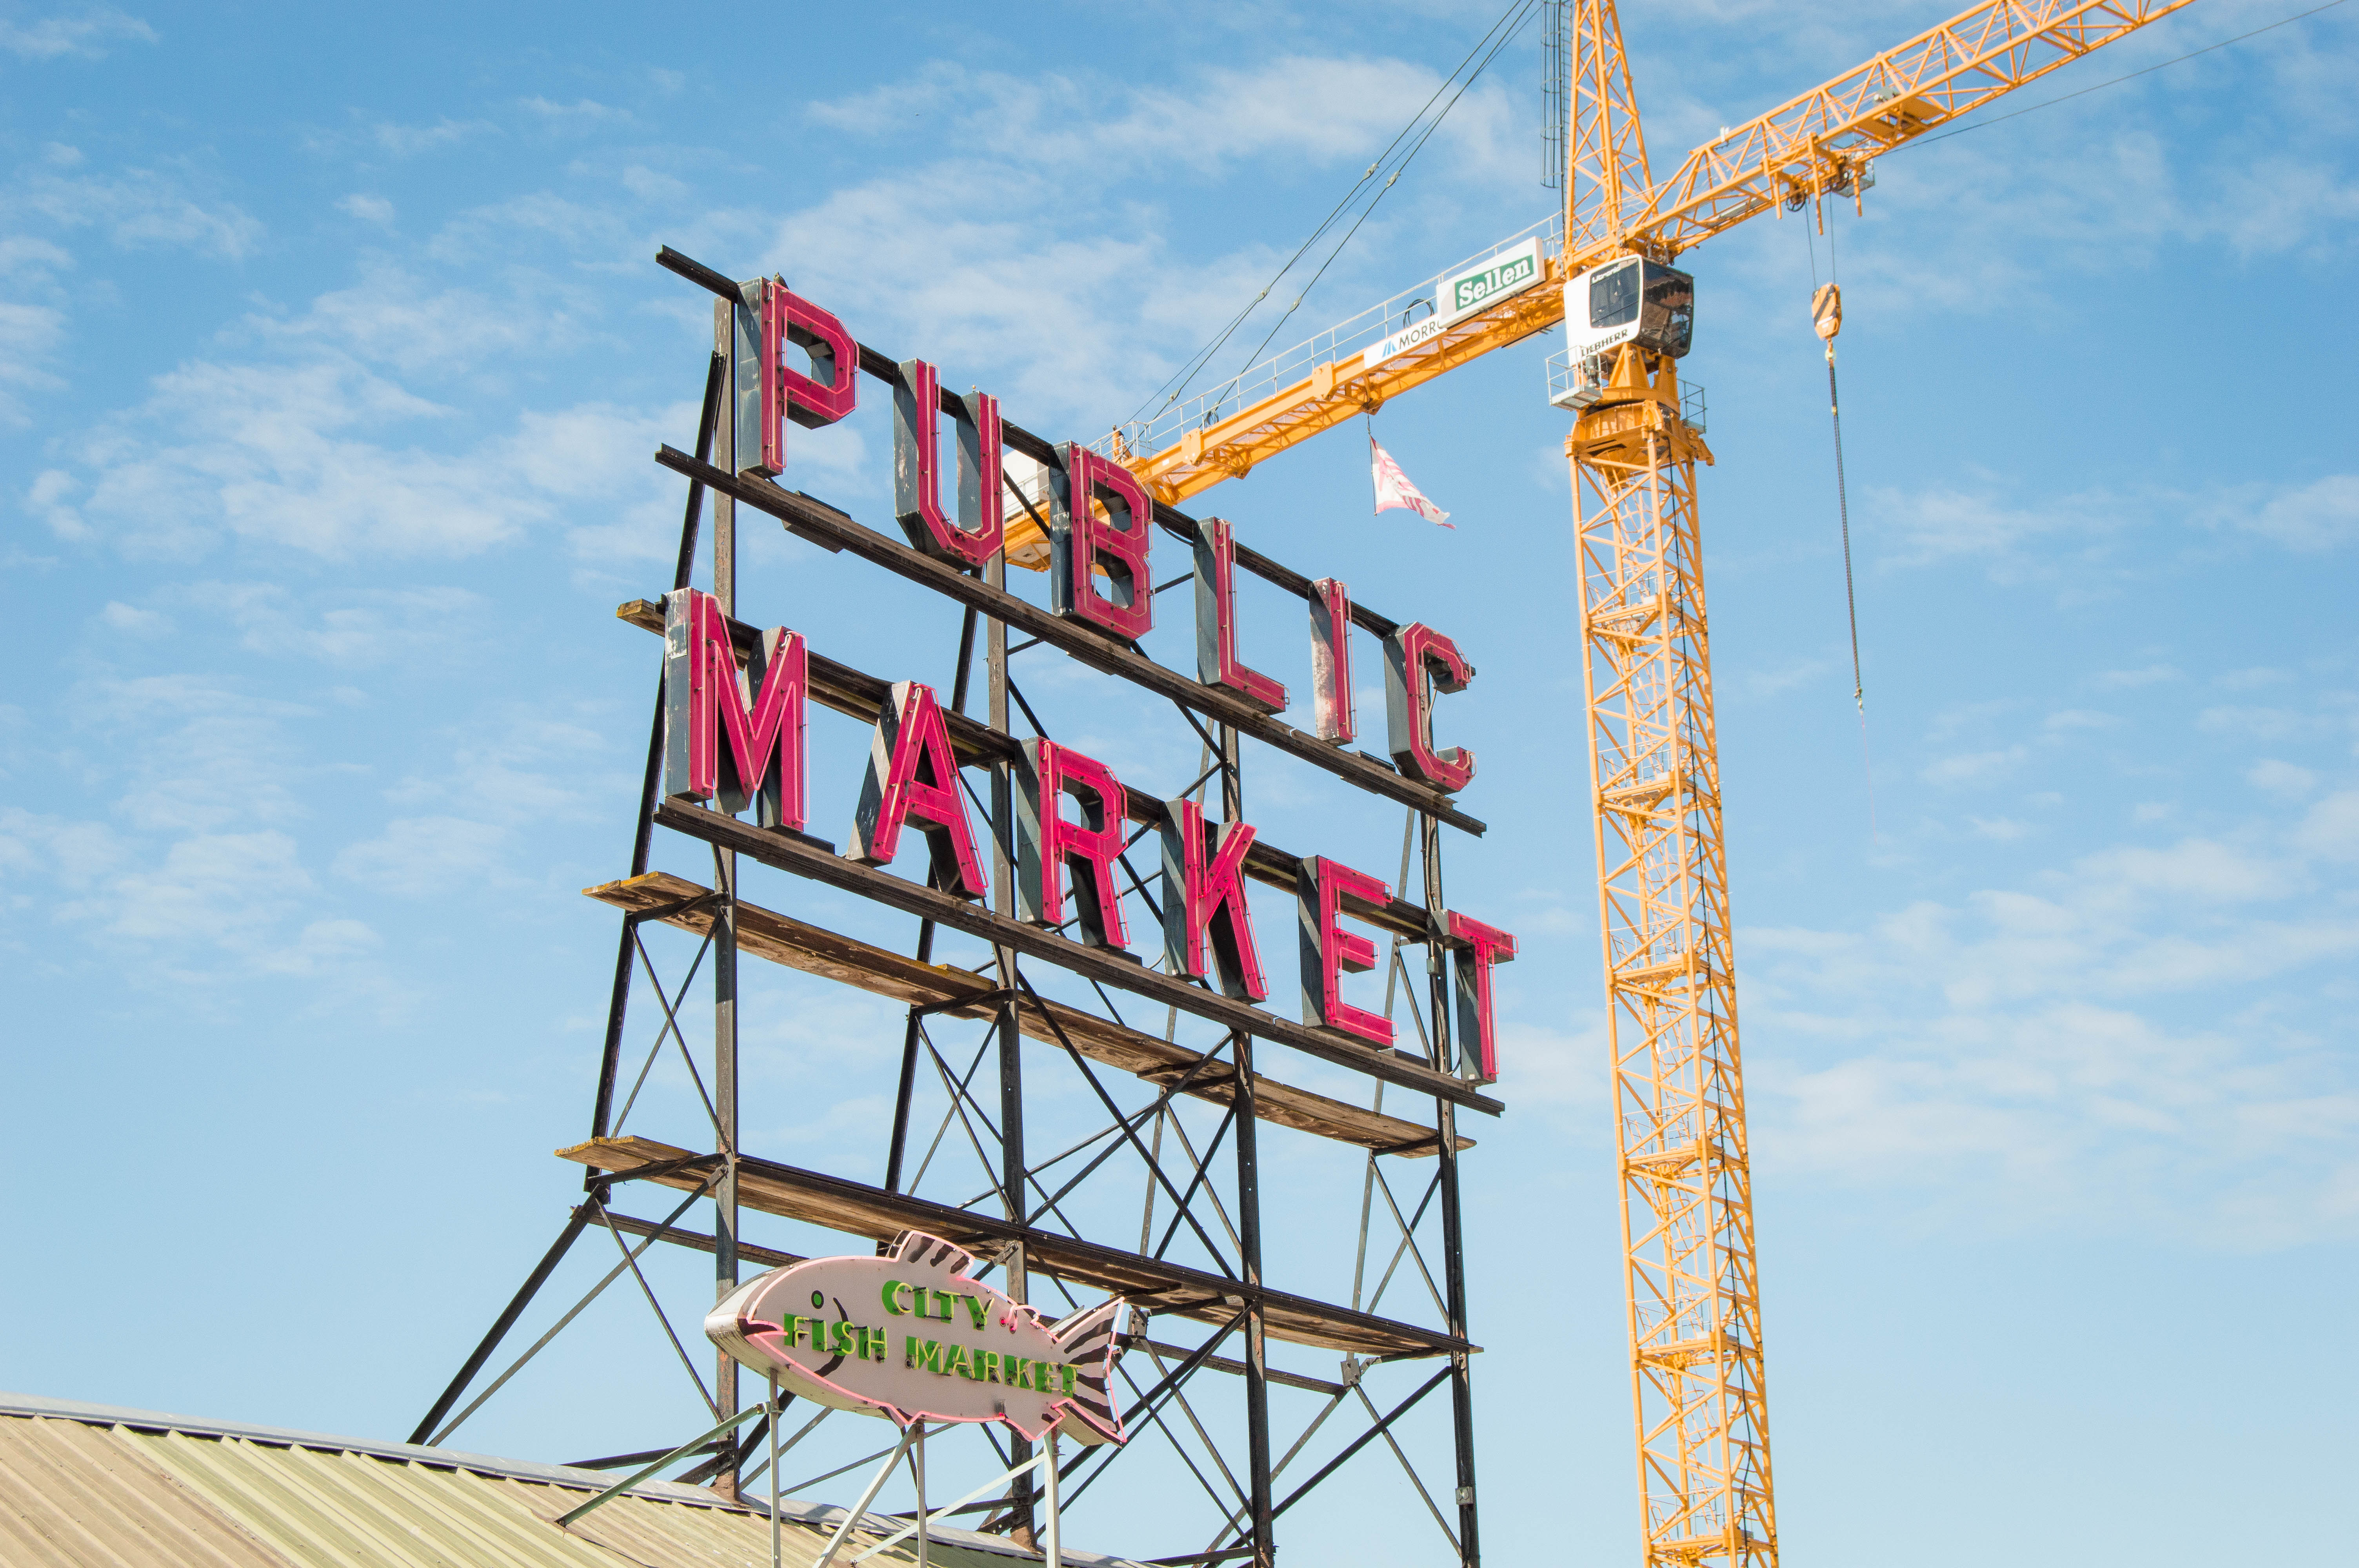 Pikes Place Market Seattle